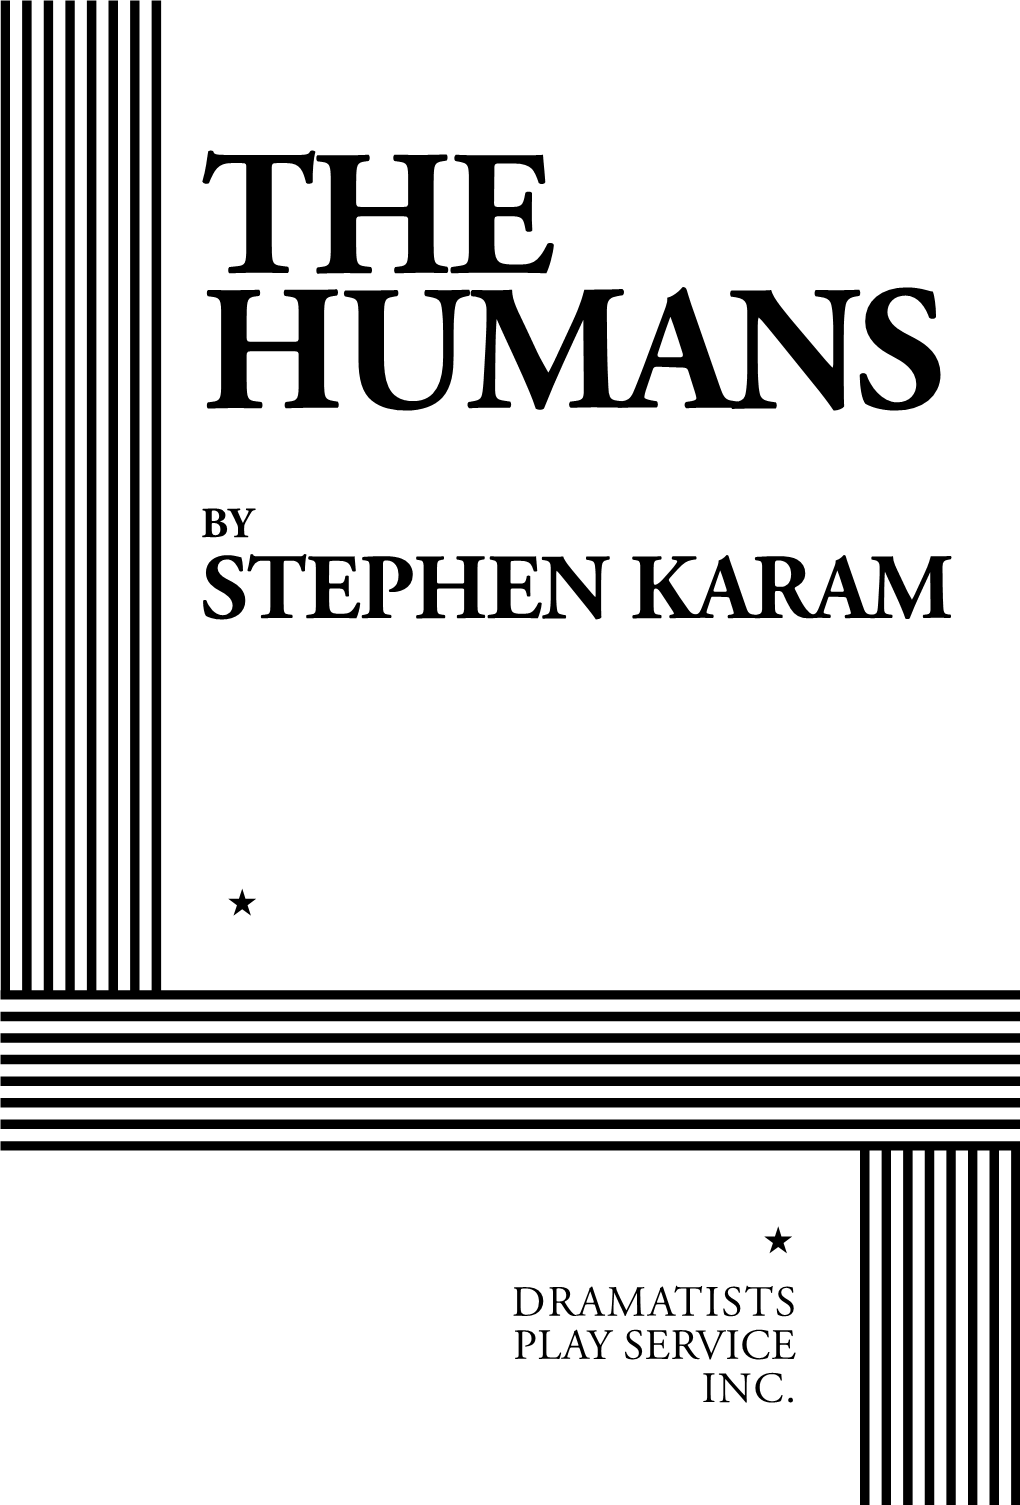 THE HUMANS by Stephen Karam Wininer of the 2016 Tony Award for Best Play